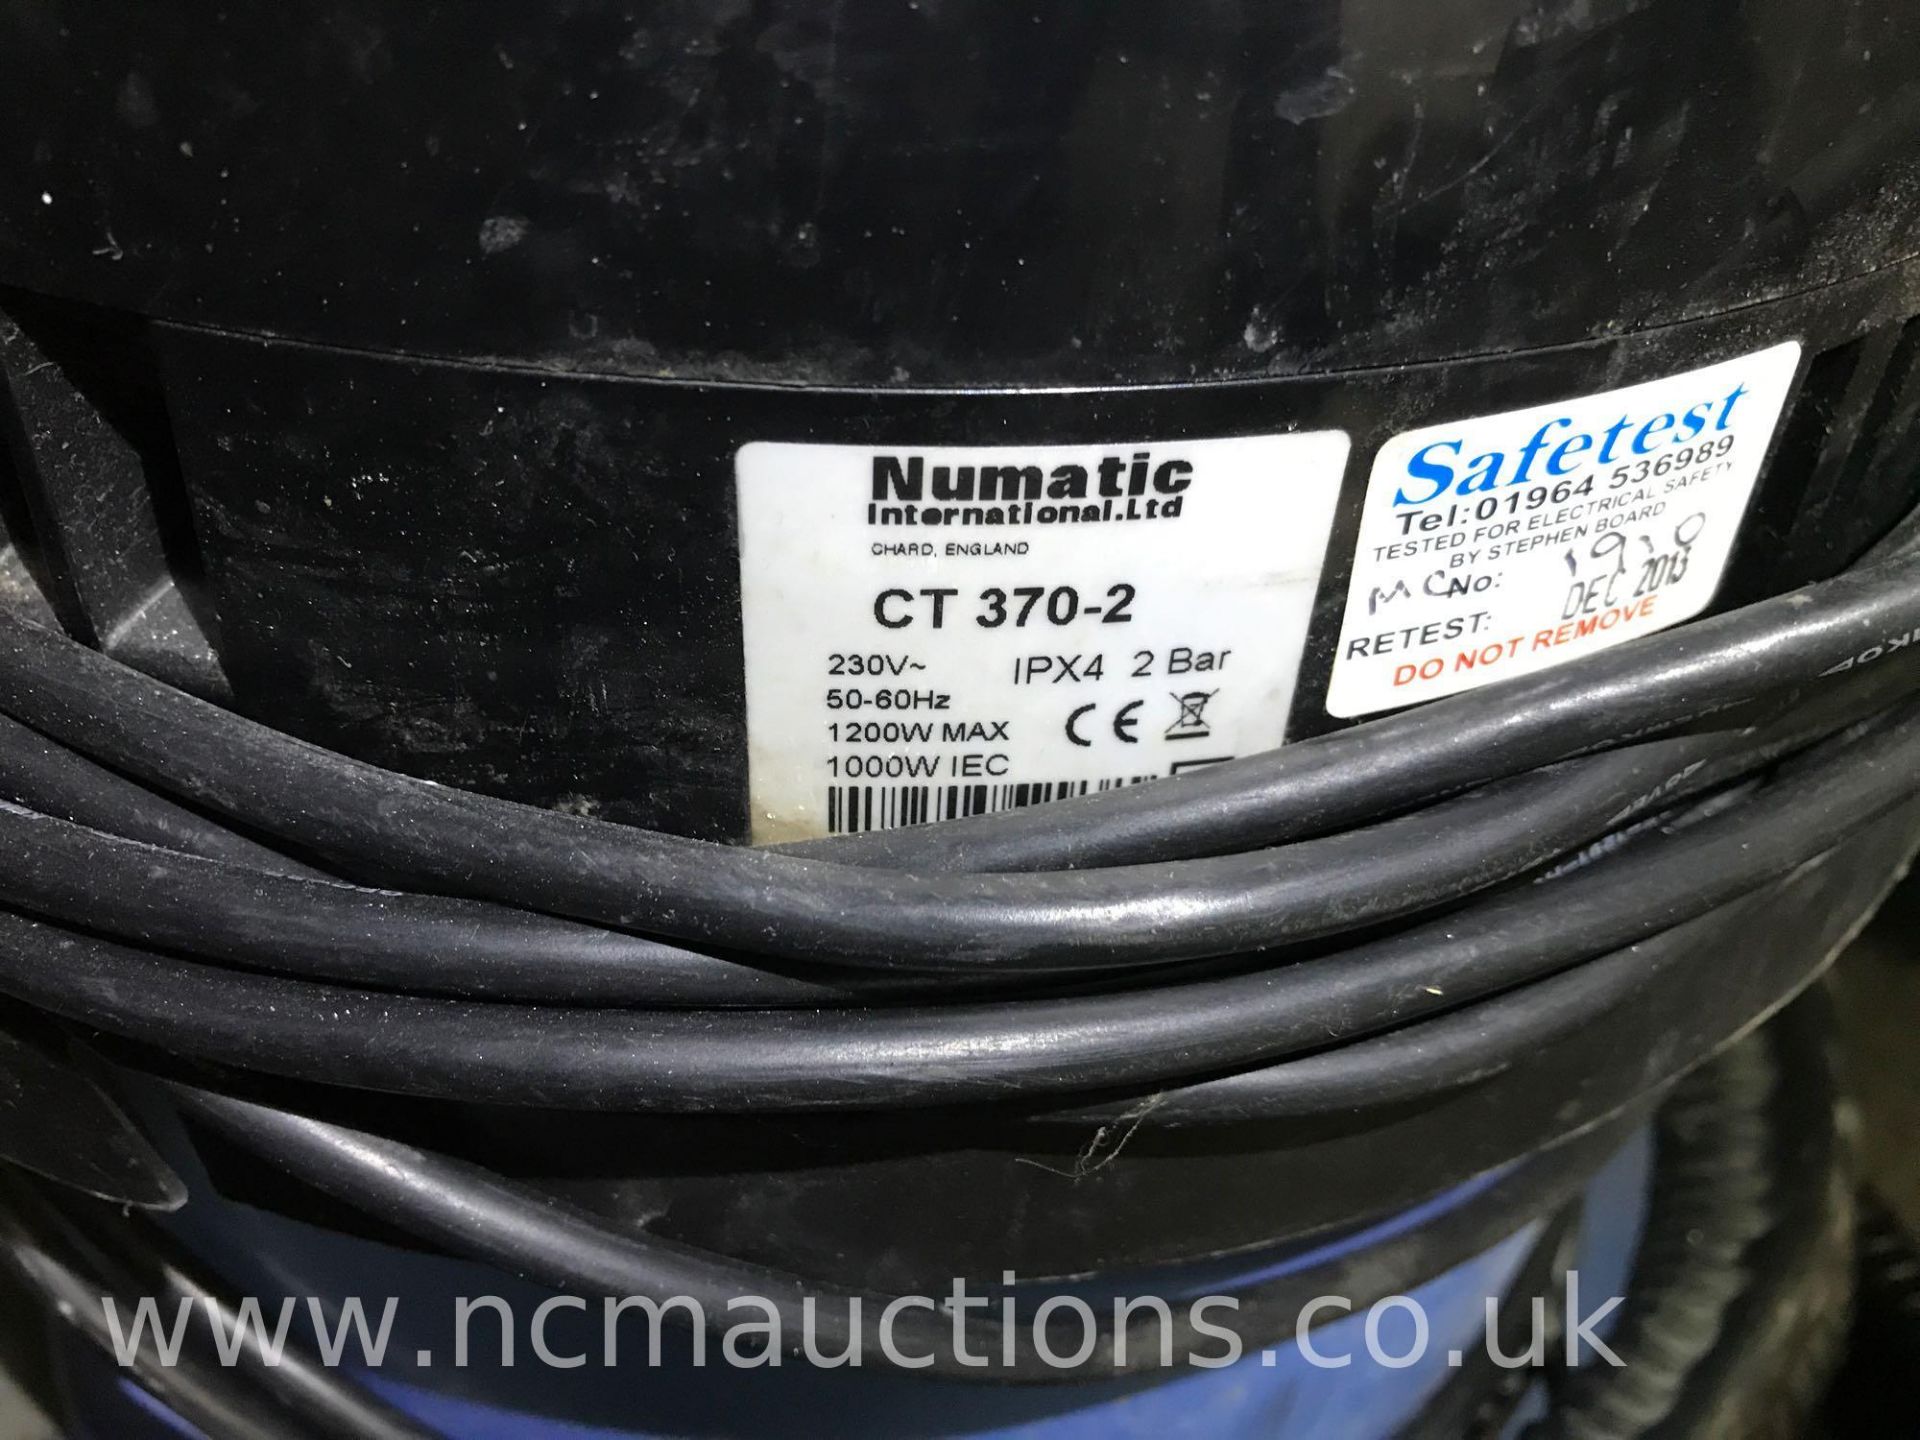 Numatic CT 370-2 wet and dry vacuum - Image 2 of 2